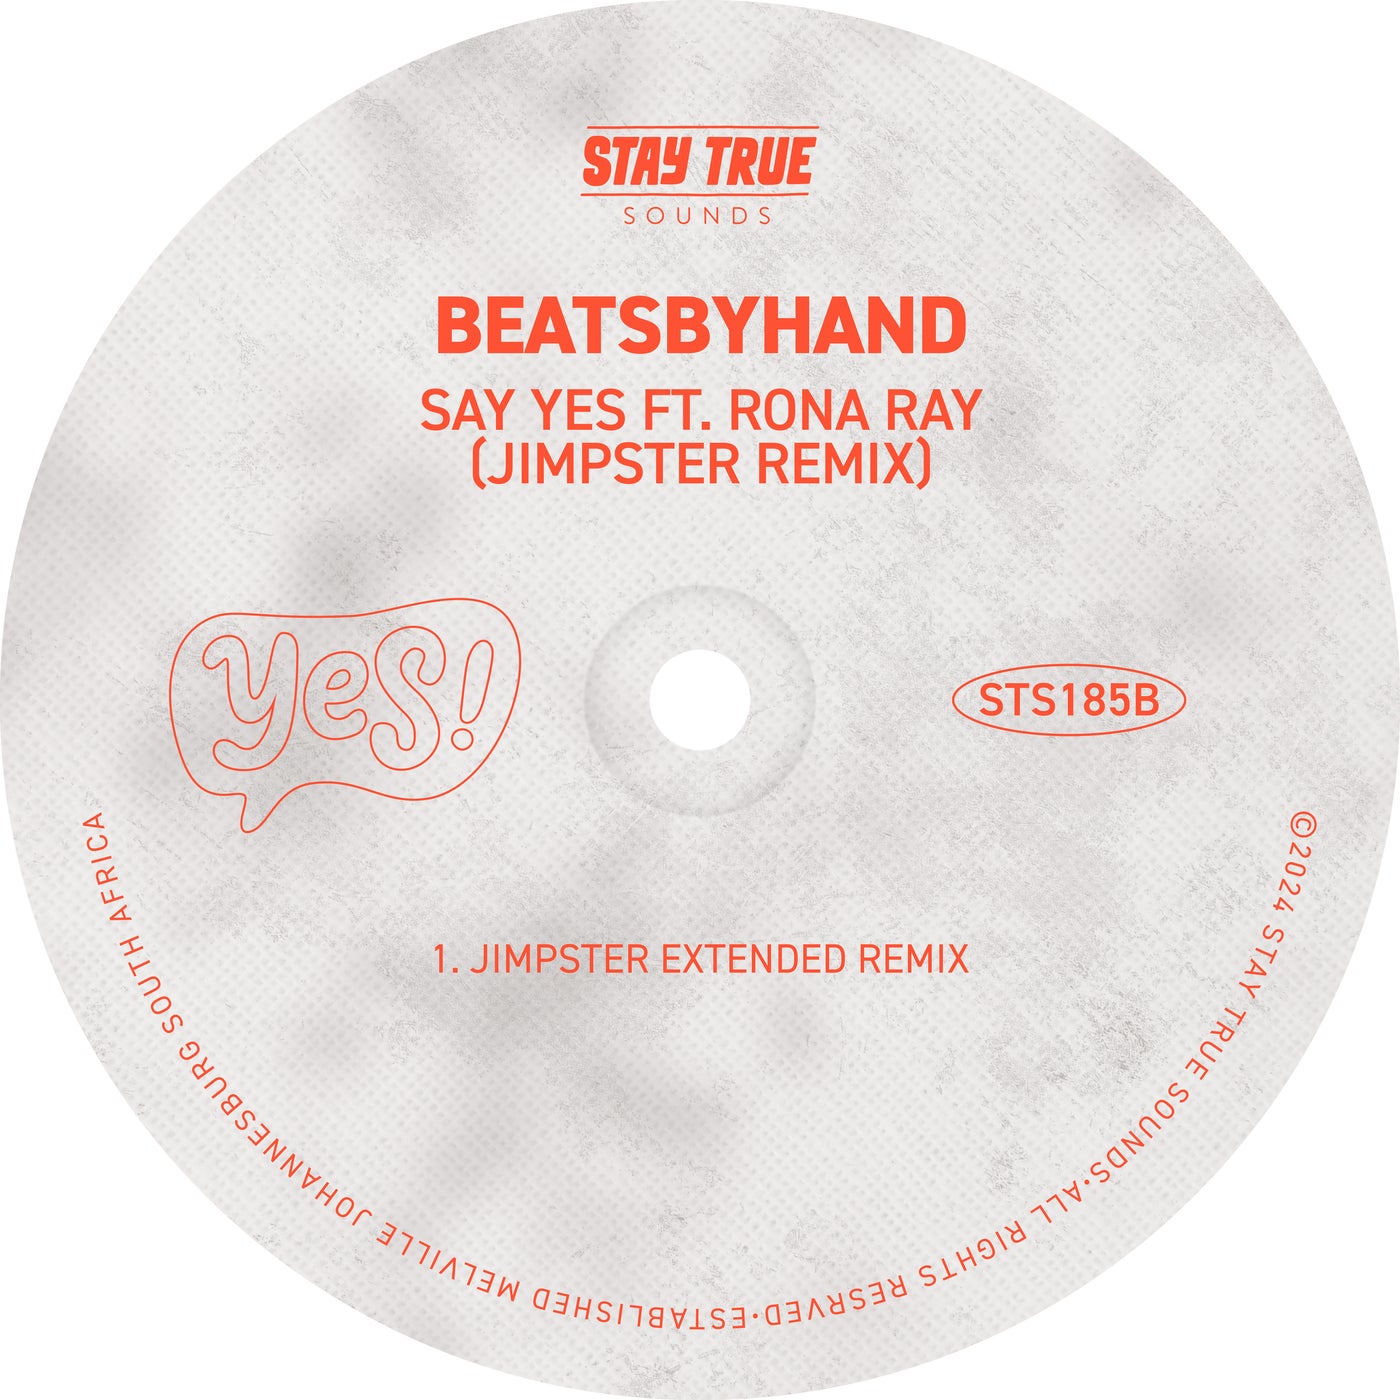 Rona Ray & beatsbyhand - Say Yes - Jimpster Extended Remix on Stay True Sounds